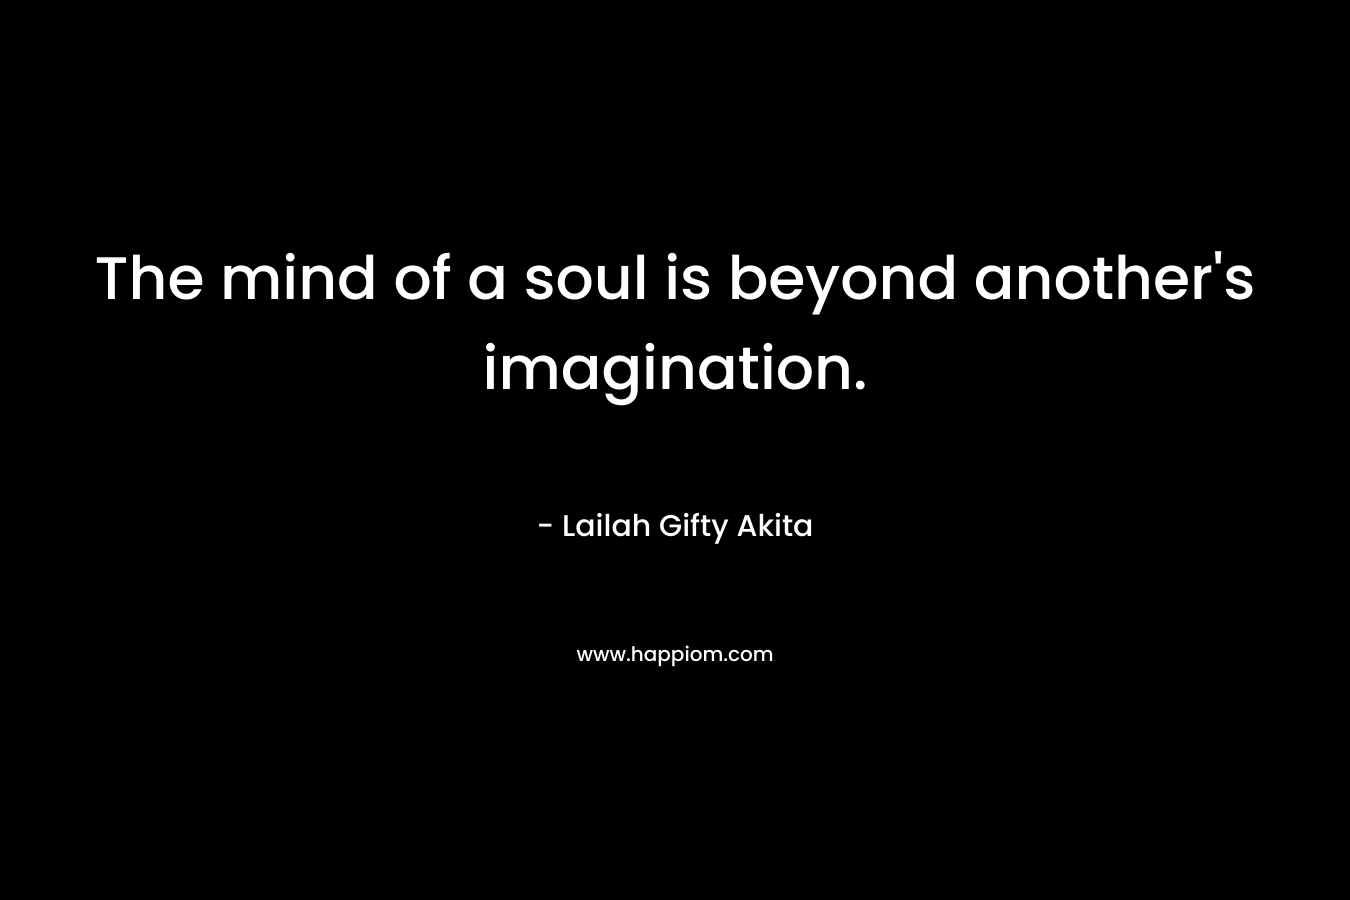 The mind of a soul is beyond another's imagination.